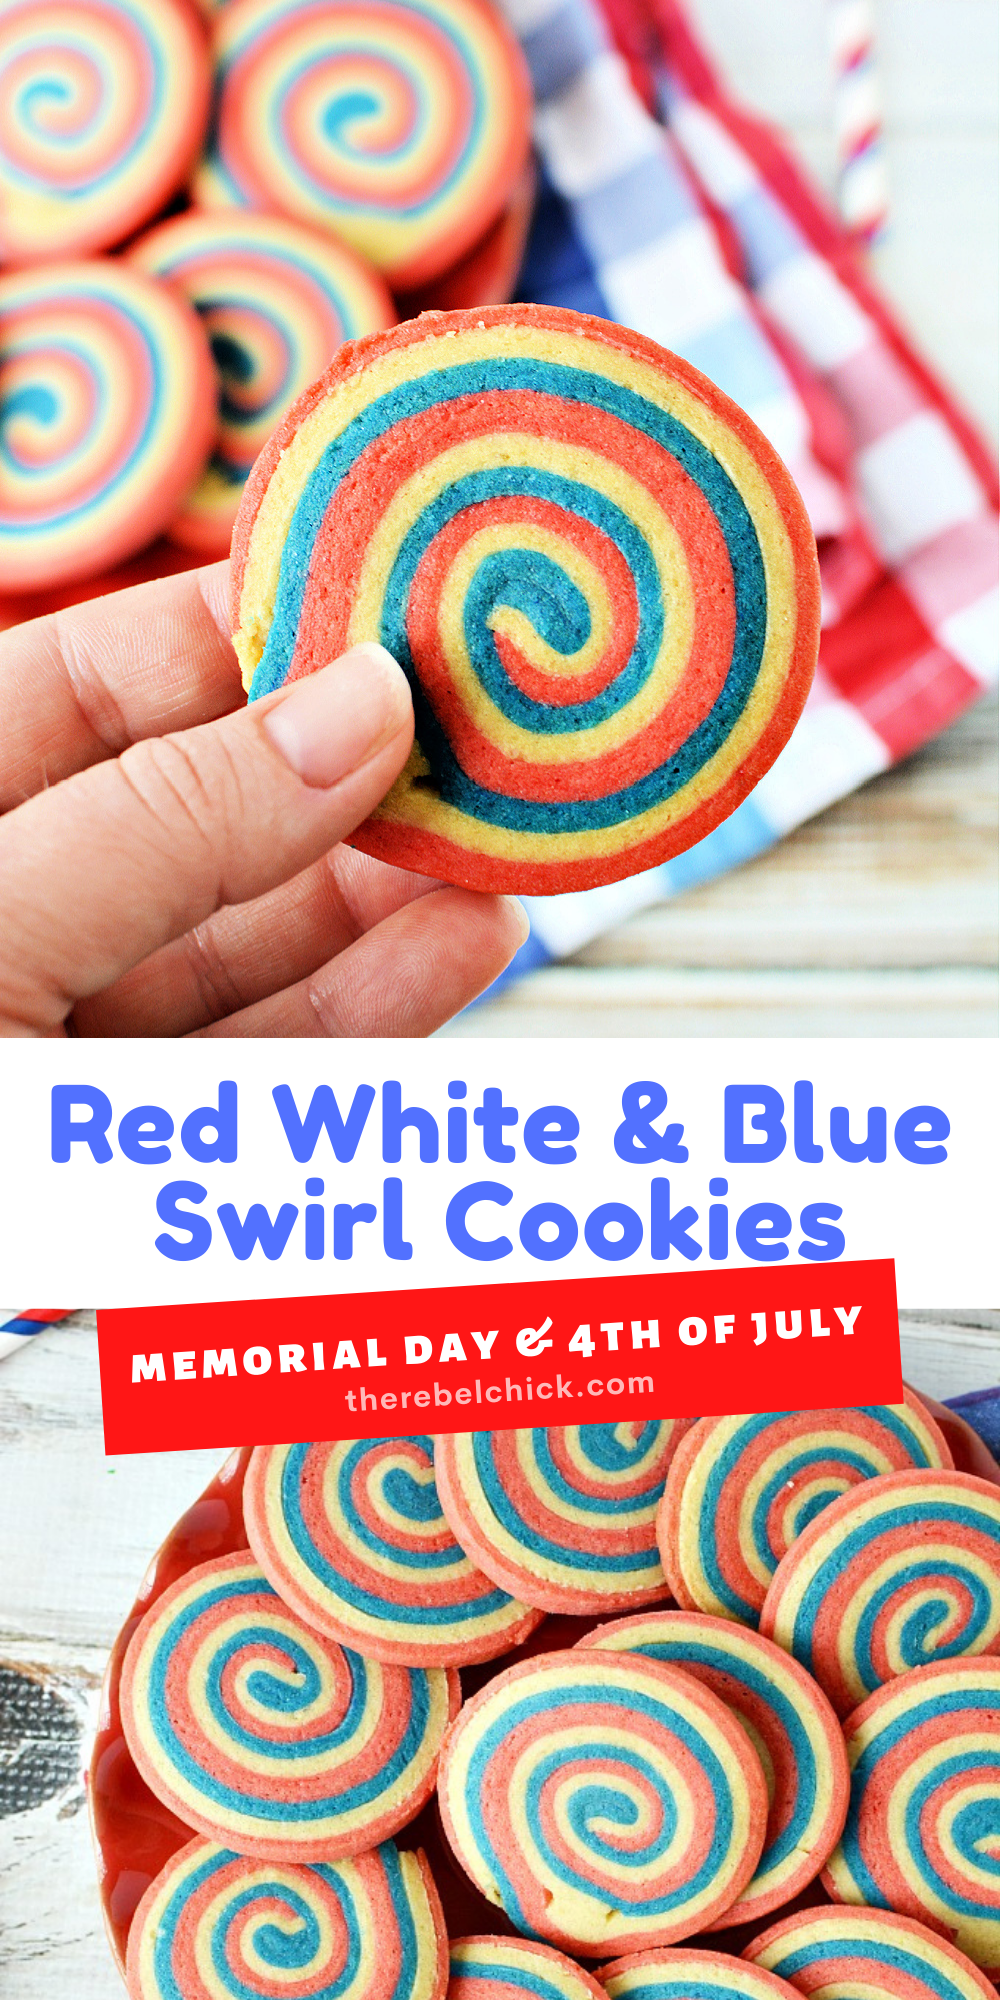 Red White and Blue Swirl Cookies Recipe